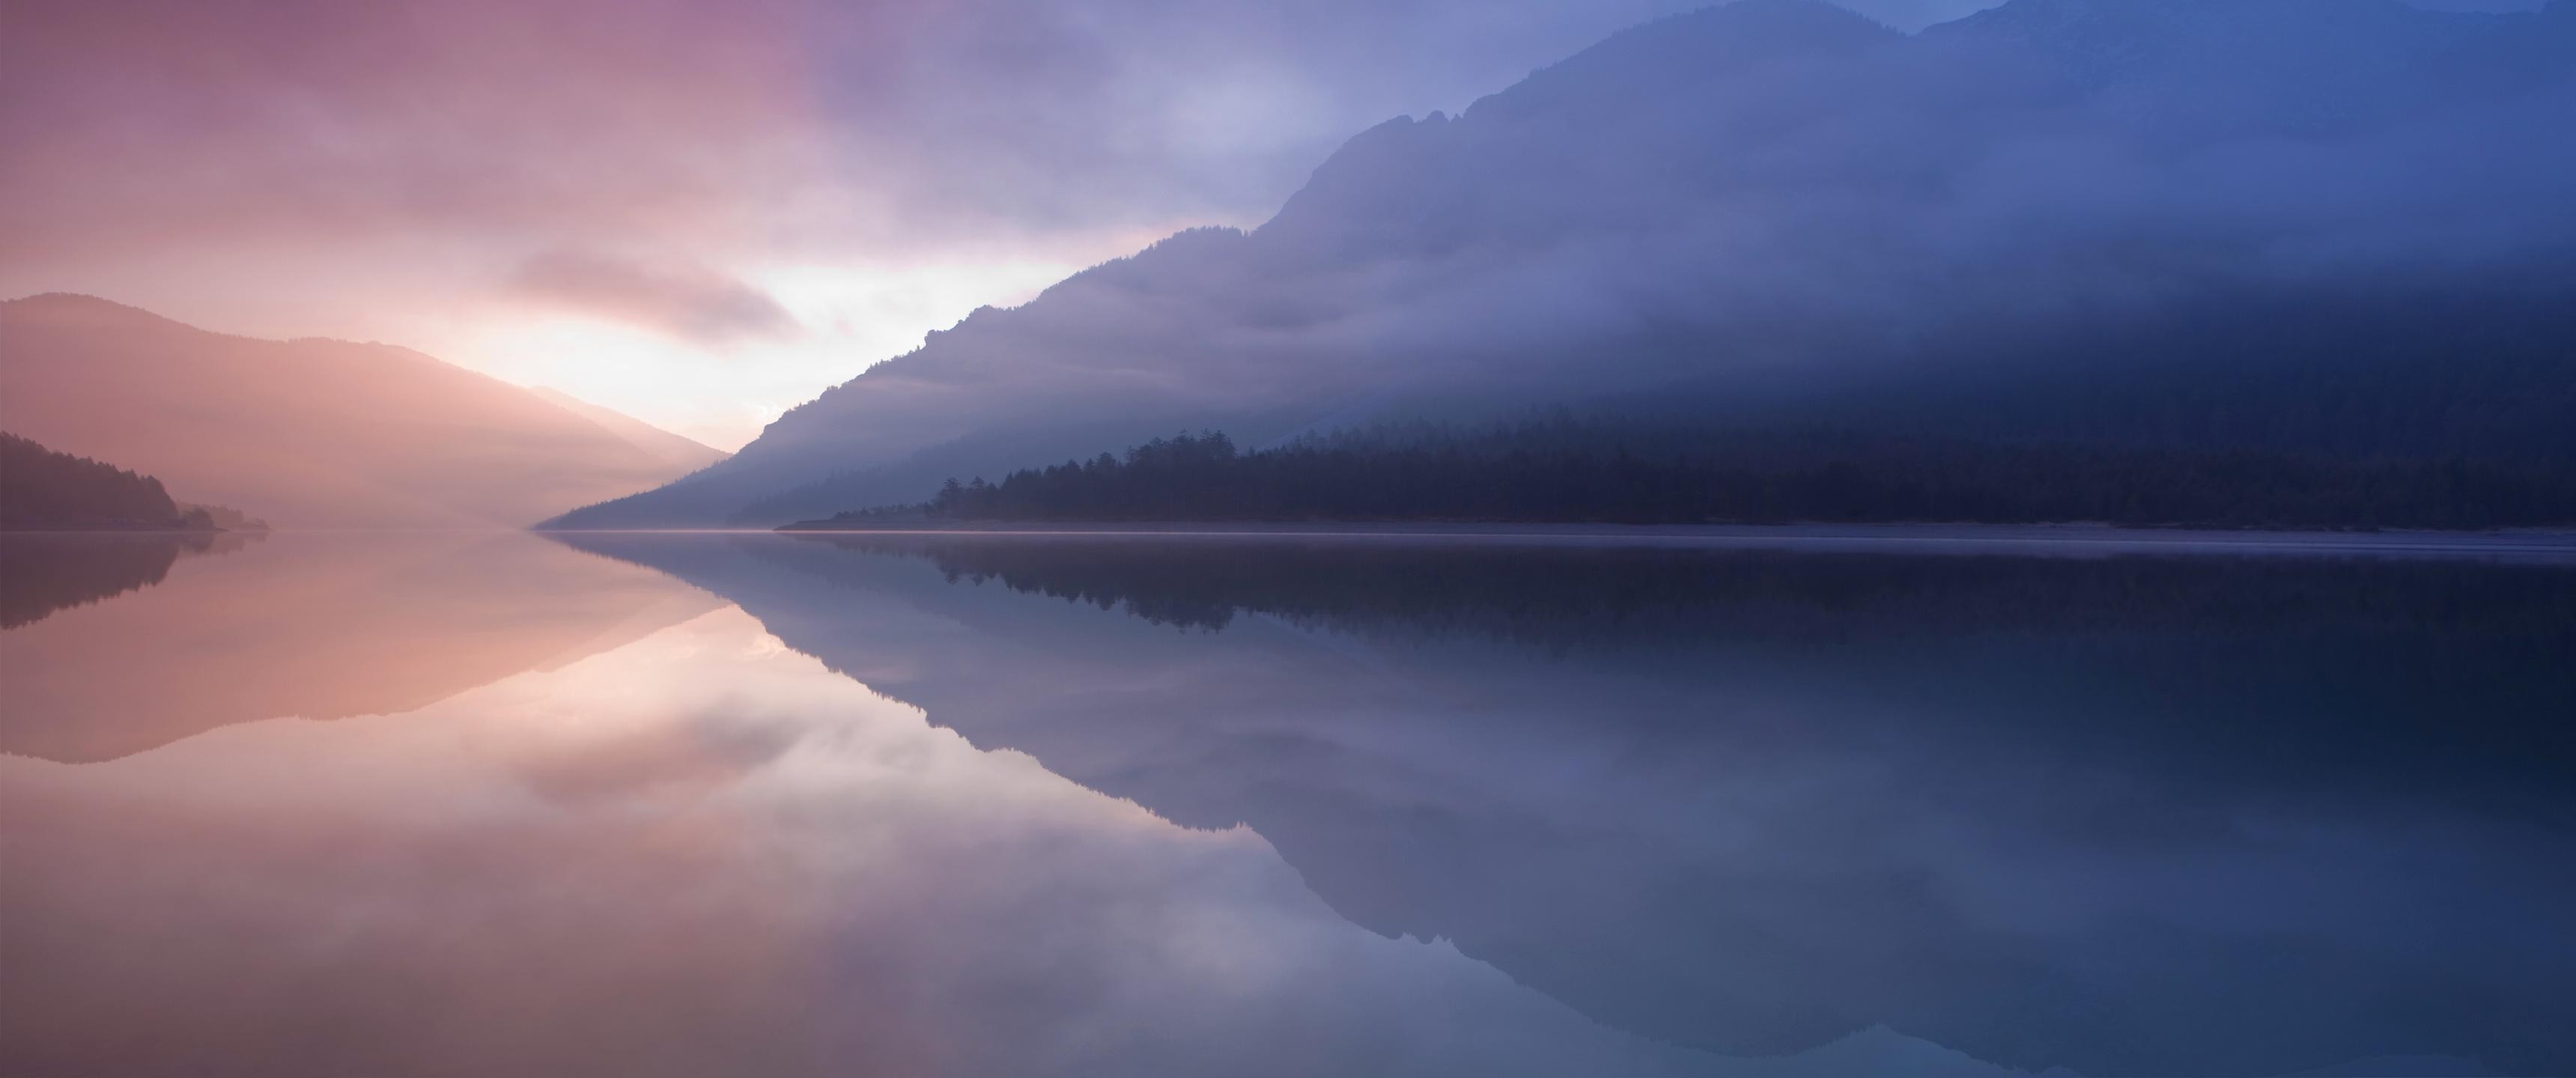 General 3440x1440 landscape water reflection mist lake mountains nature